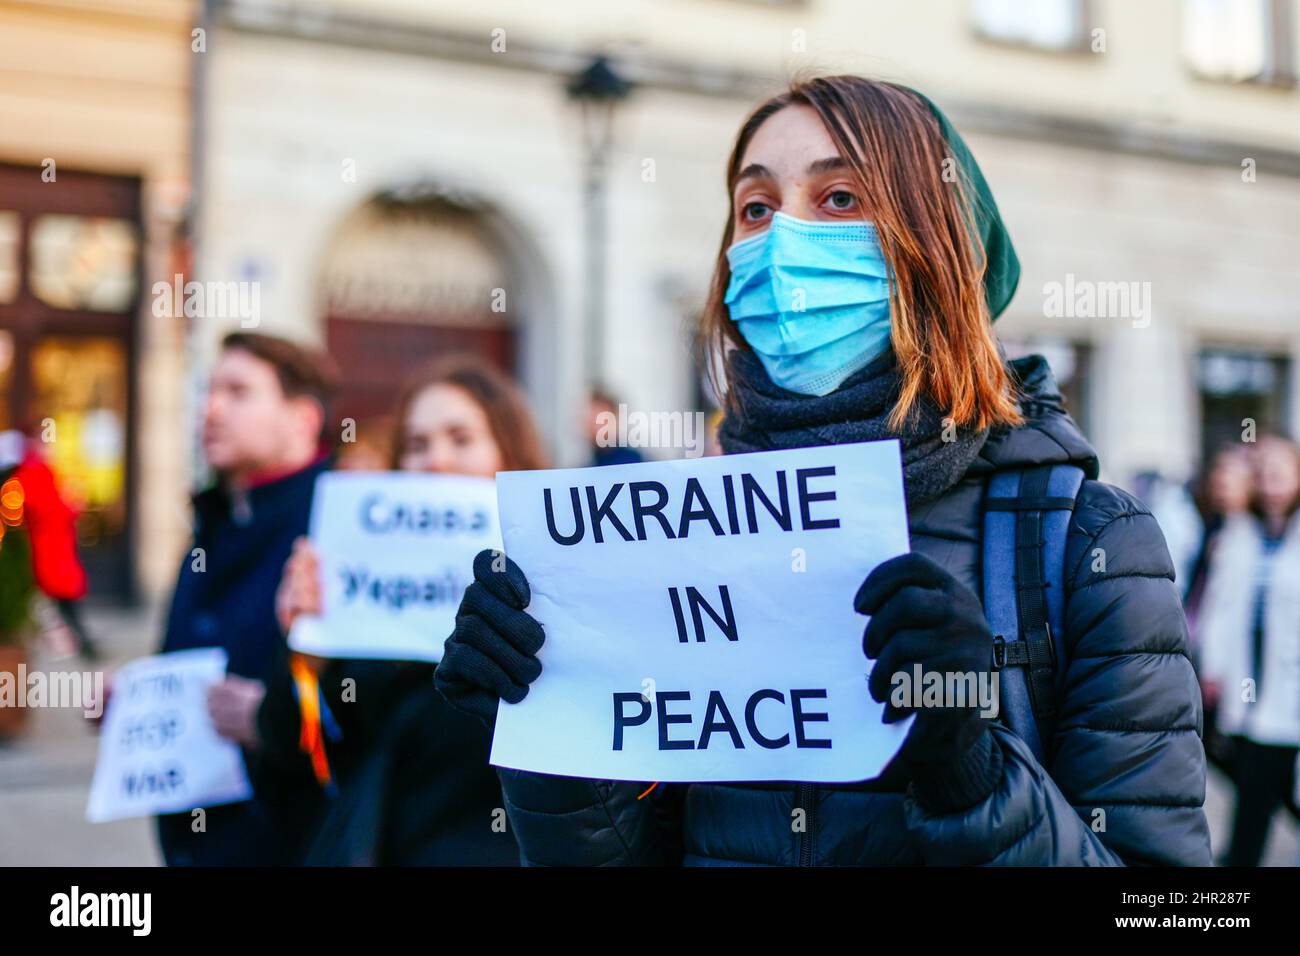 A protester wearing a facemask holds a banner that reads 'Ukraine in peace'.  Following the beginning of the Russian invasion of Ukraine, members of t Stock Photo